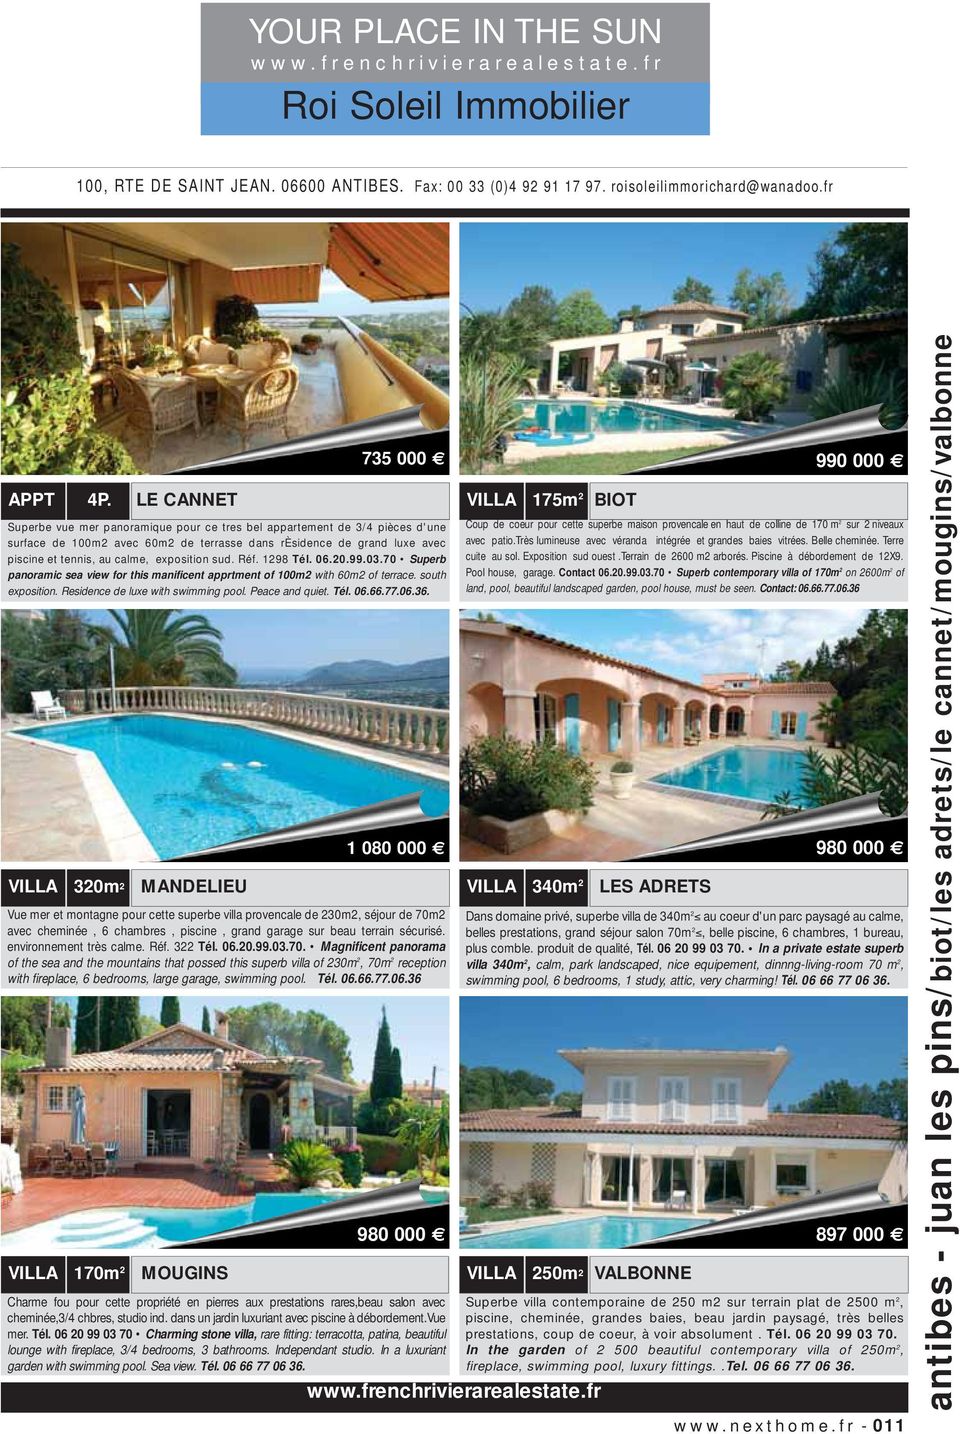 sud. Réf. 1298 Tél. 06.20.99.03.70 Superb panoramic sea view for this manificent apprtment of 100m2 with 60m2 of terrace. south exposition. Residence de luxe with swimming pool. Peace and quiet. Tél. 06.66.